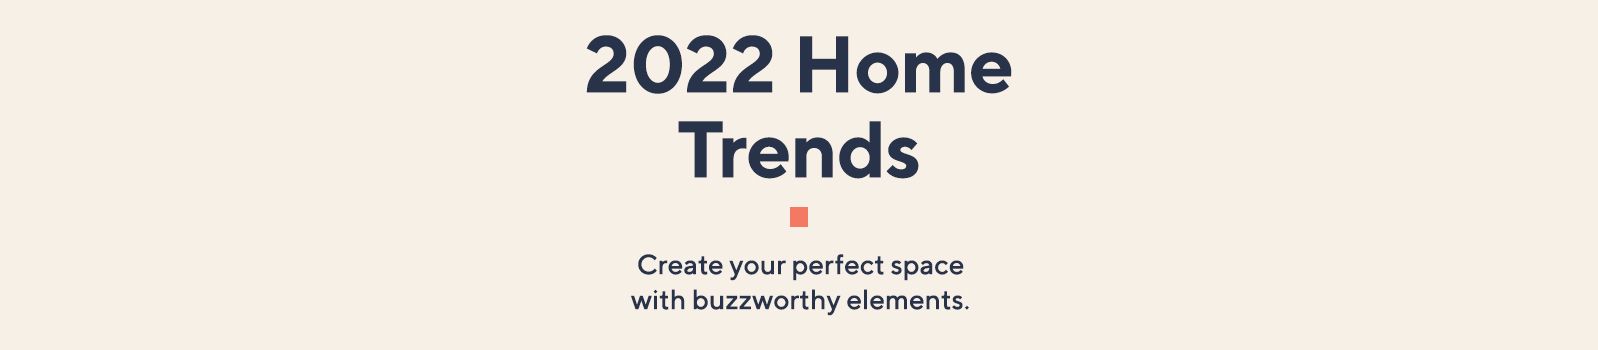 2022 Home Trends  Create your perfect space with buzzworthy elements. 